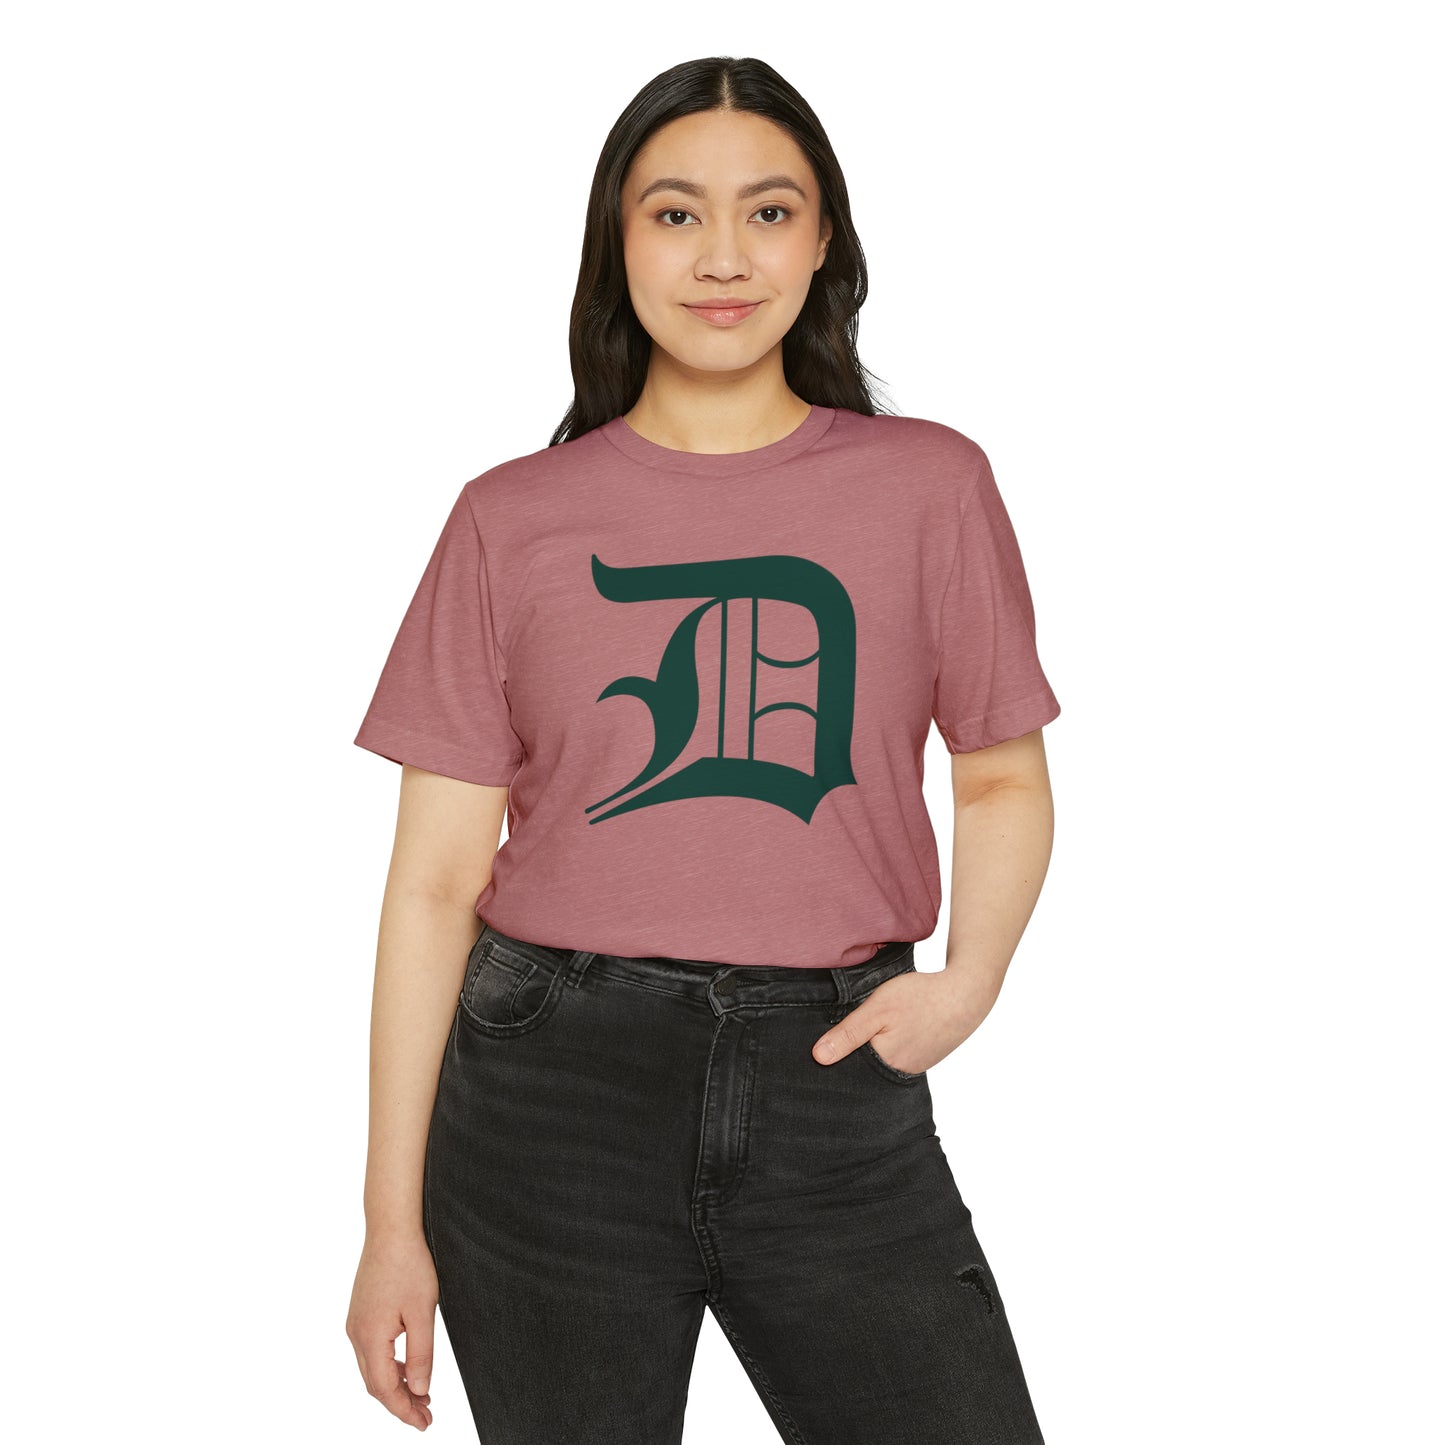 Detroit 'Old English D' T-Shirt (Laconic Green) | Unisex Recycled Organic